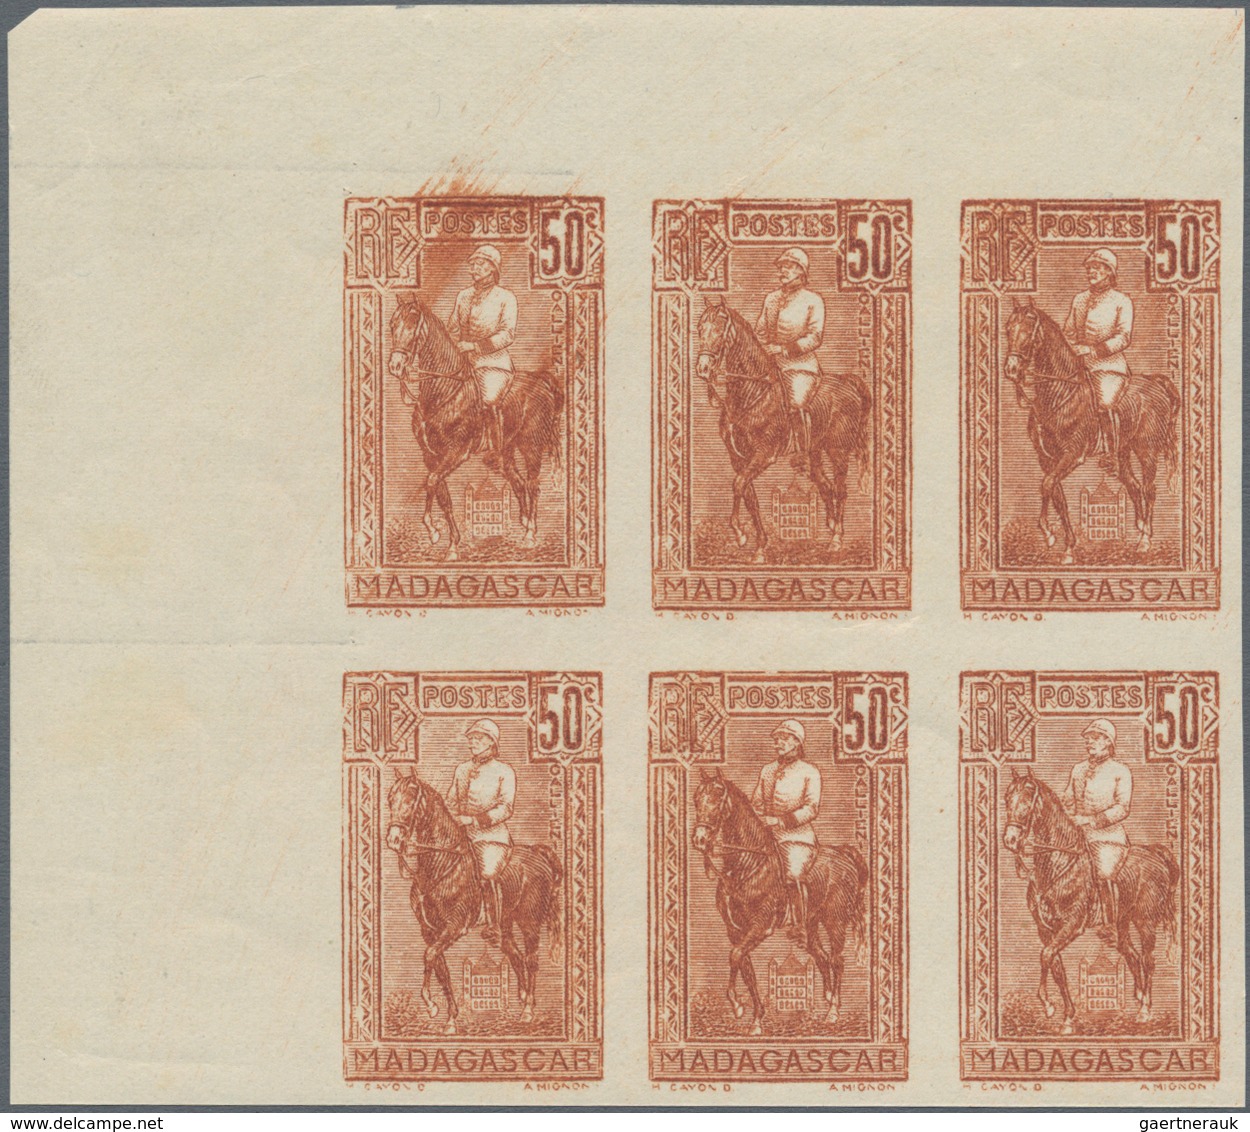 Madagaskar: 1931, Gouverneur Gallieni definitives complete set of five in IMPERFORATE blocks of six